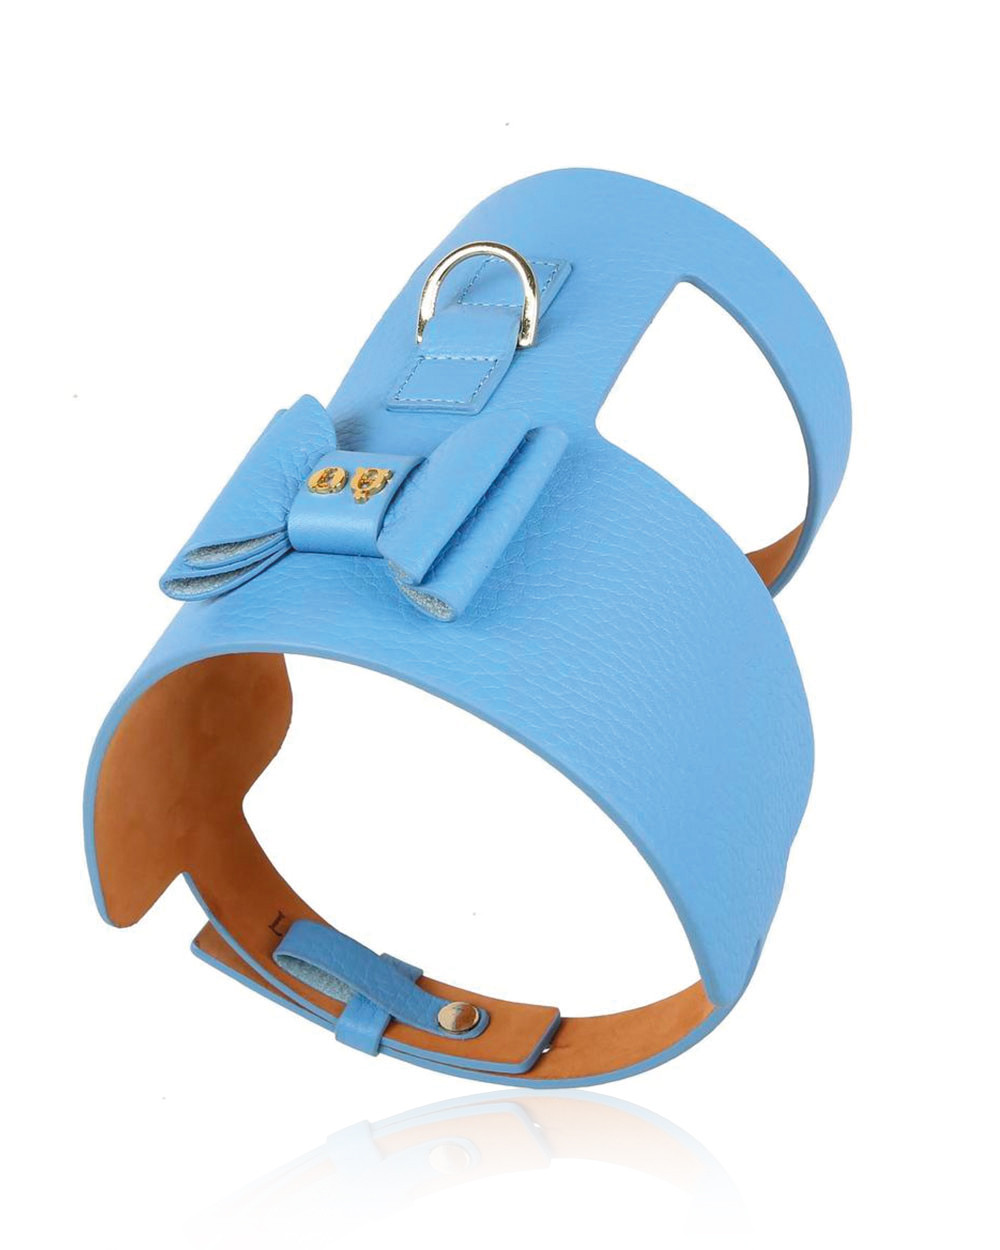 Beautifully crafted dog harness from genuine leather.